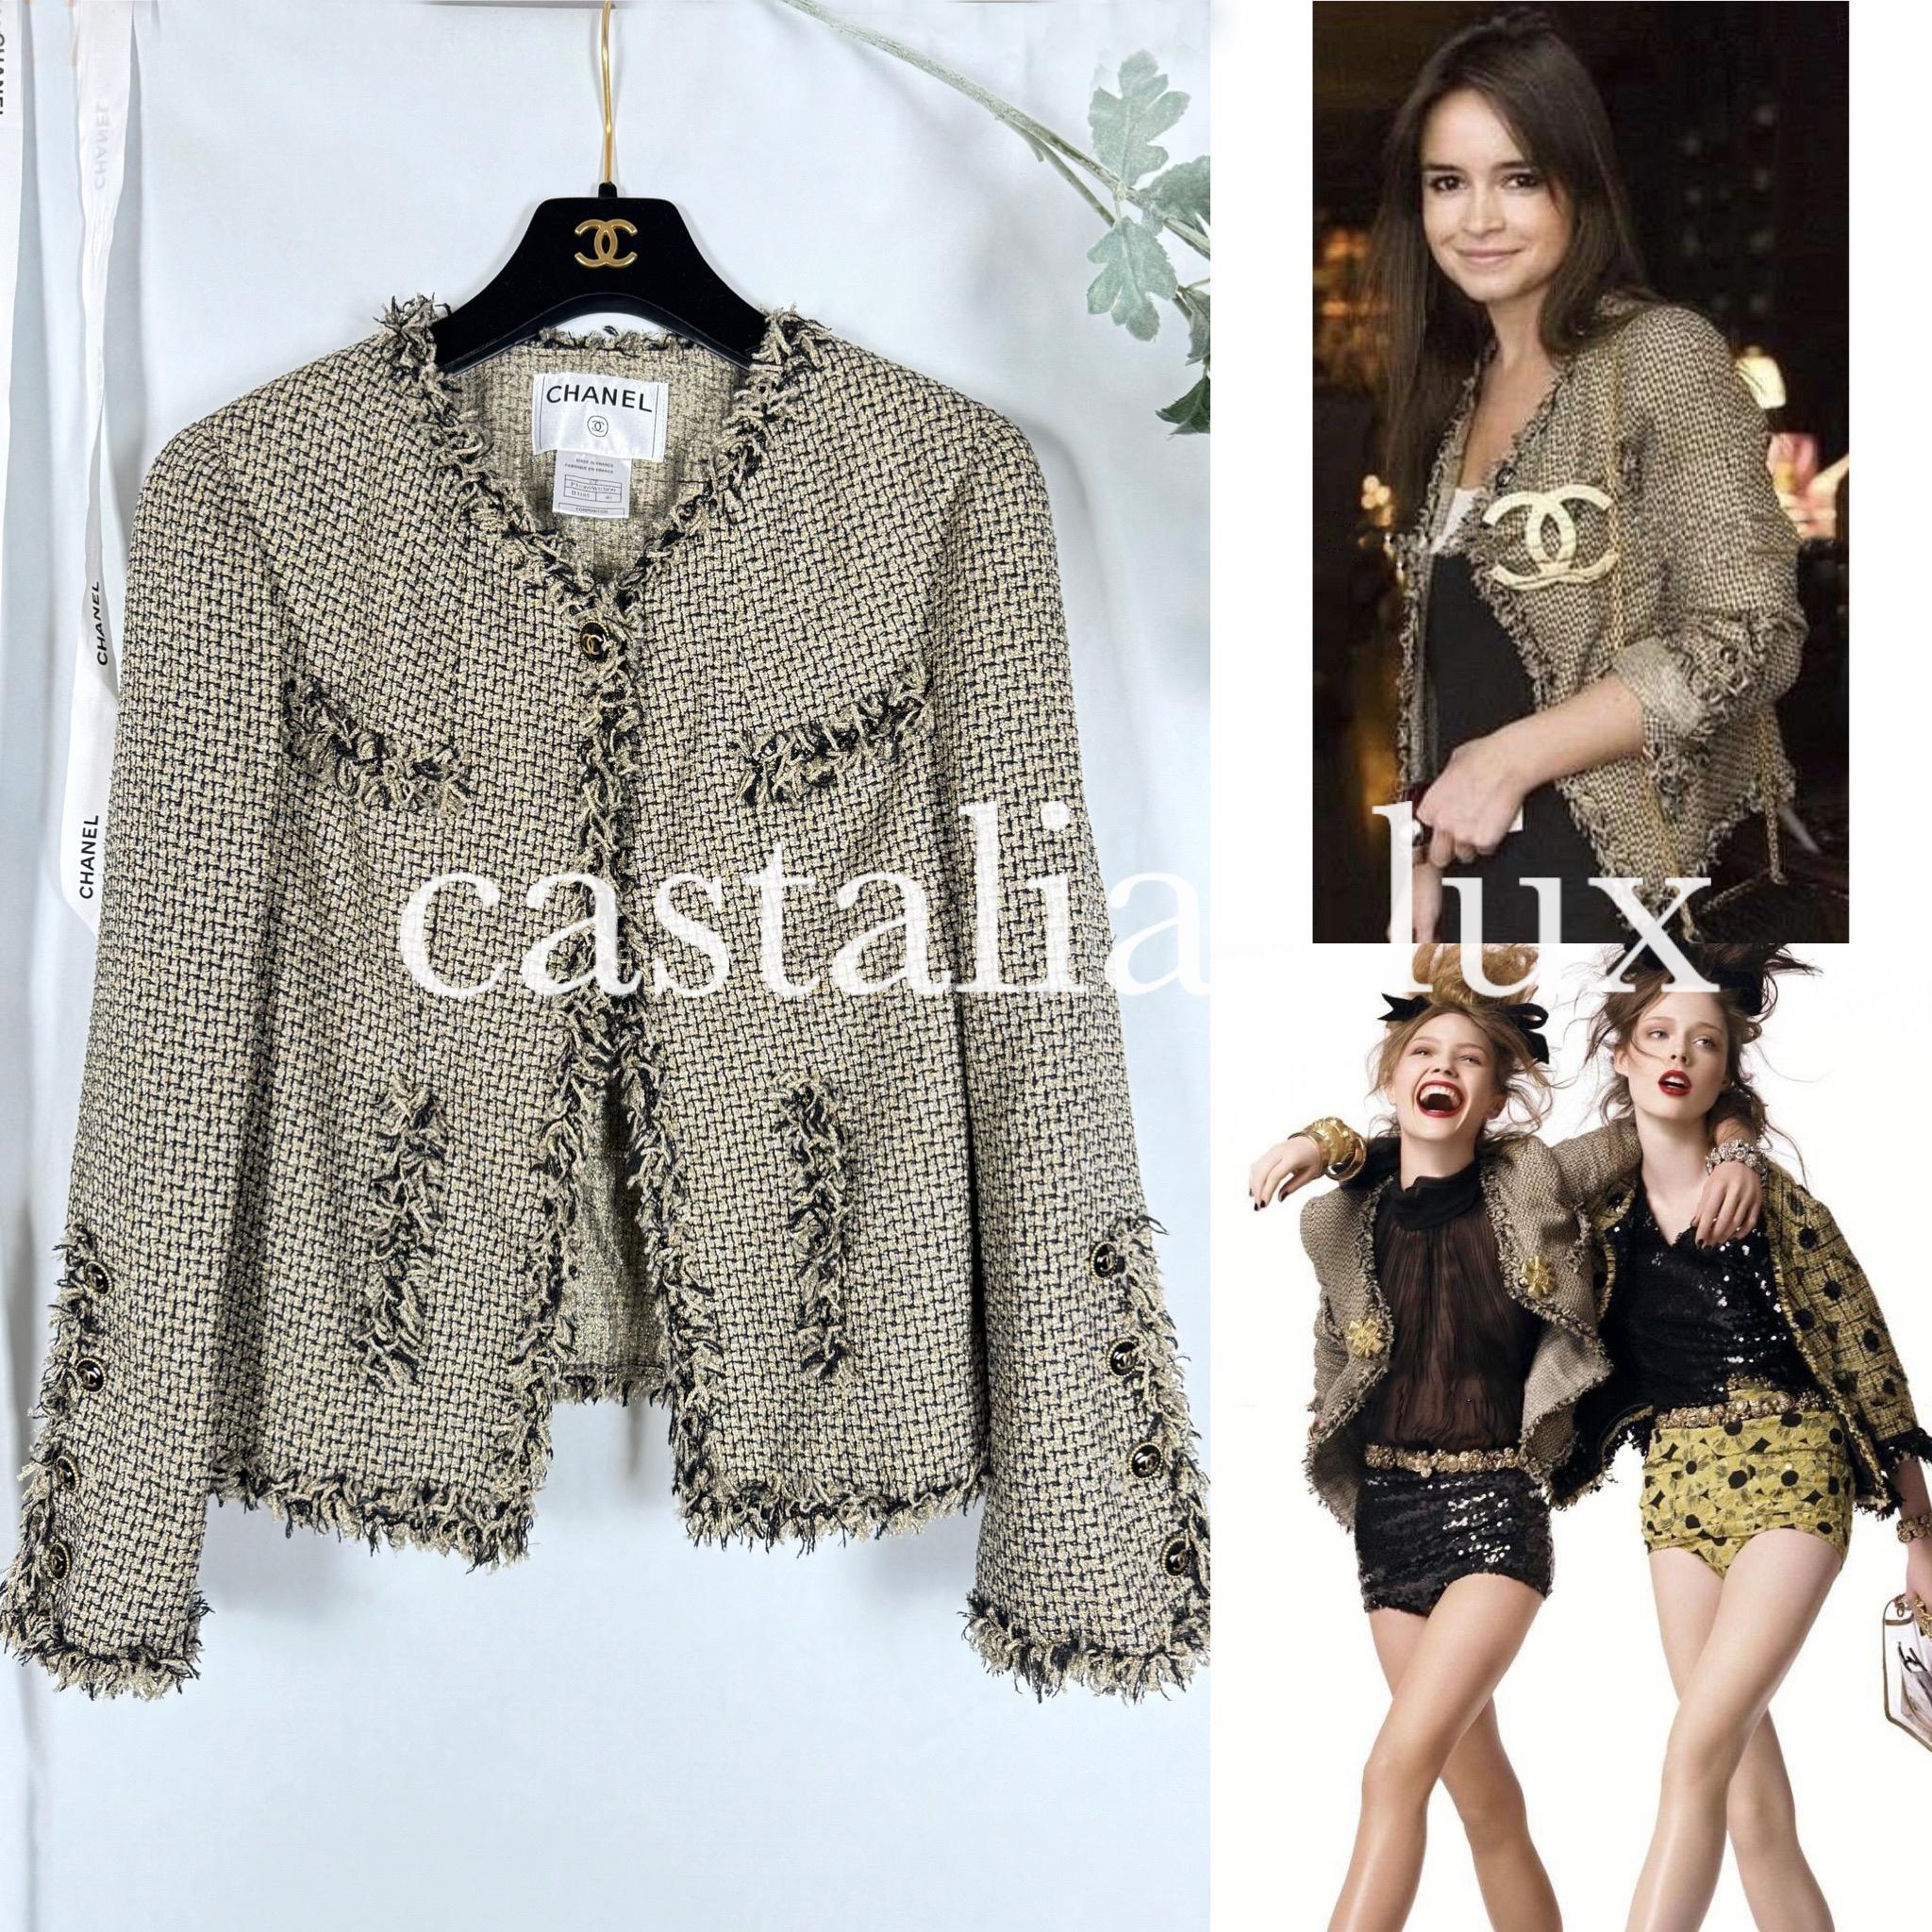 Iconic and famous Chanel lesage tweed jacket with 2007 Spring Collection : as seen in Ad Campaign and on many celebs, incl. Miroslava Duma!
- CC logo buttons at center front and cuffs
- made of beautiful Lesage tweed in neutral beige / etoupe and